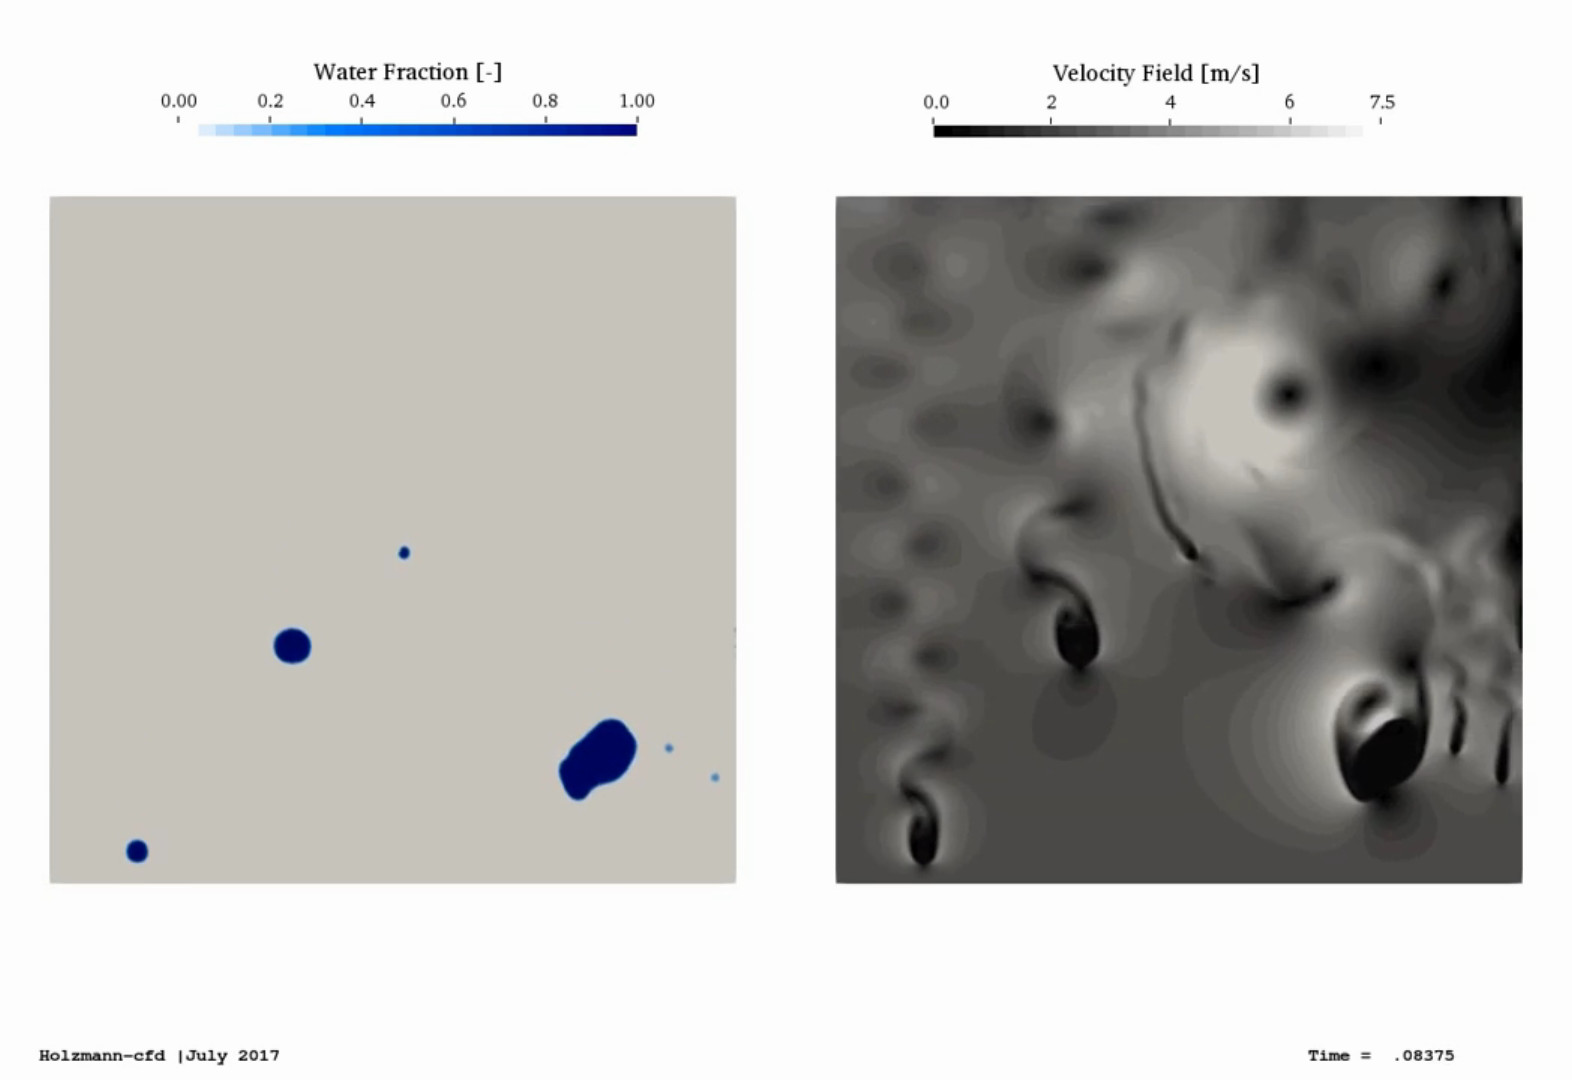 Image: Bounced droplets and the corresponding velocity field